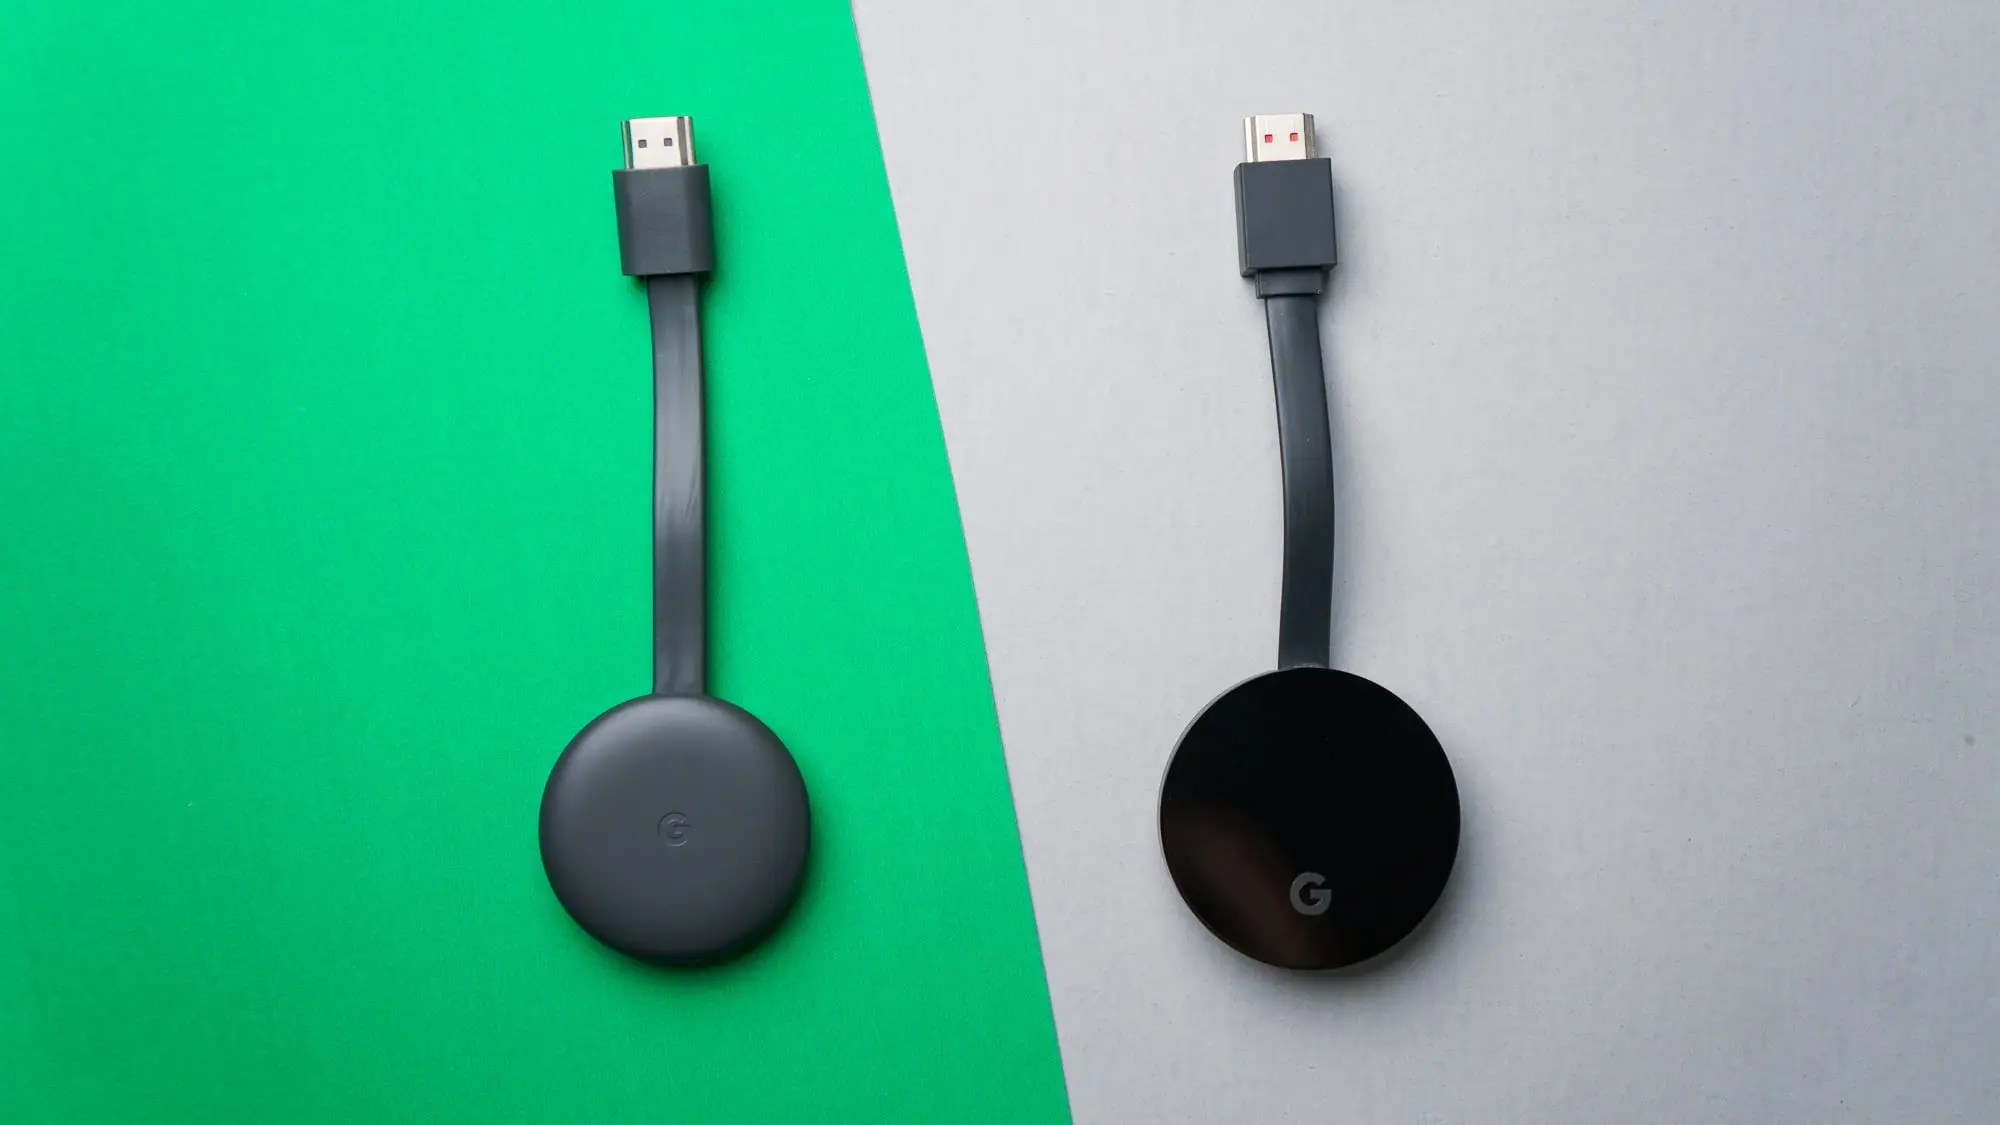 Chromecast Vs. Chromecast Ultra: Which One is Best for You